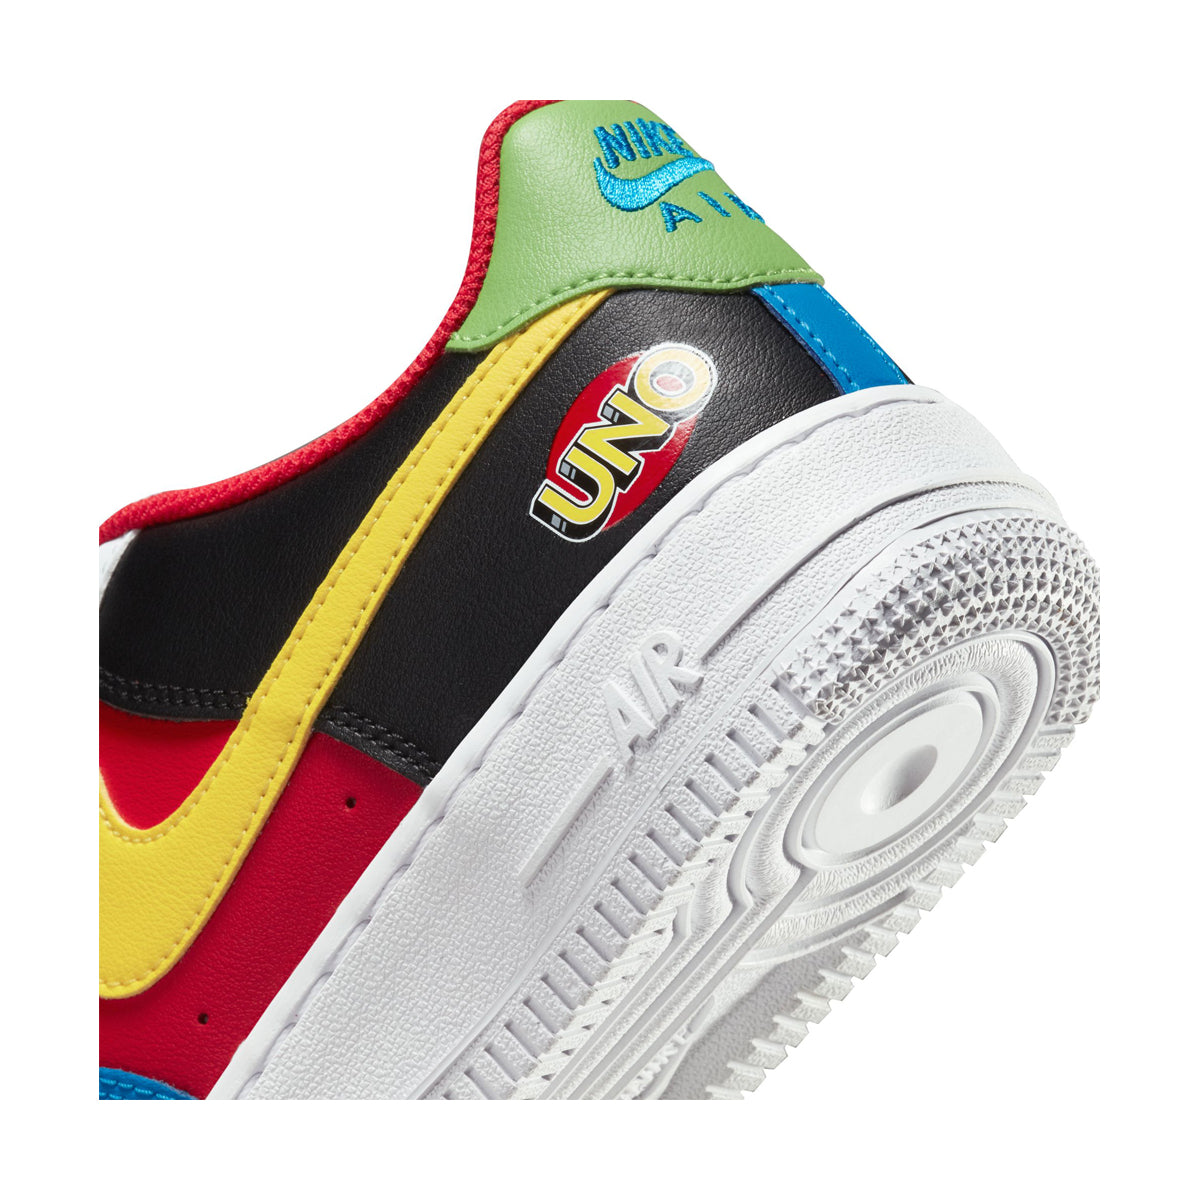  Nike Air Force 1 Lv8 Big Kids Style: 849345-002 Size: 4